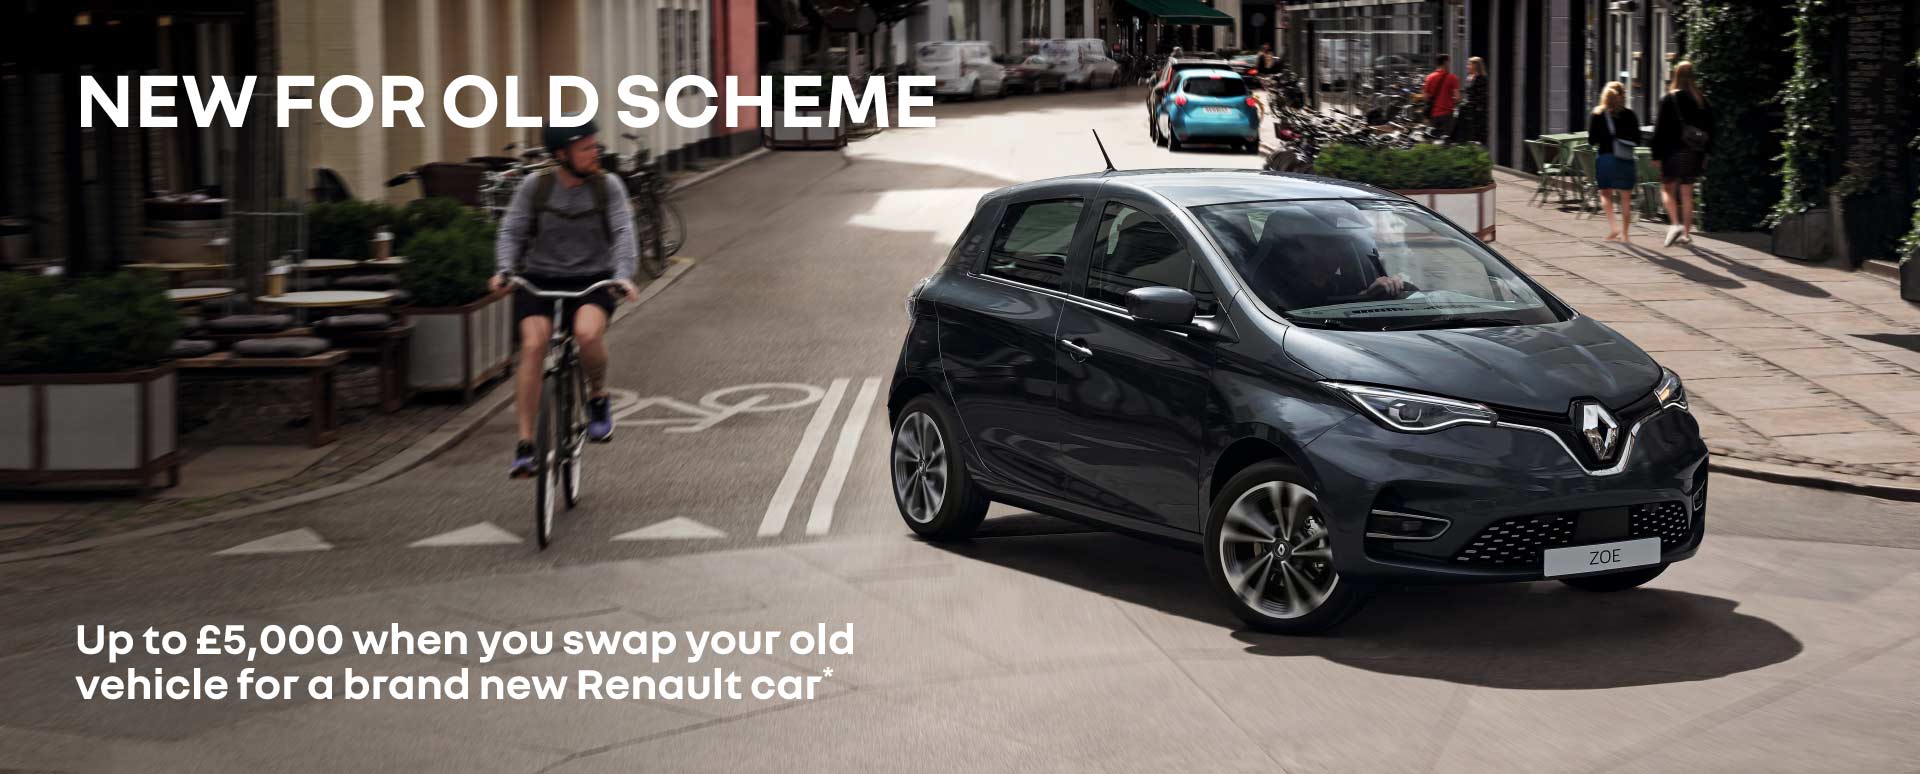 Renault New For Old Scrappage Scheme